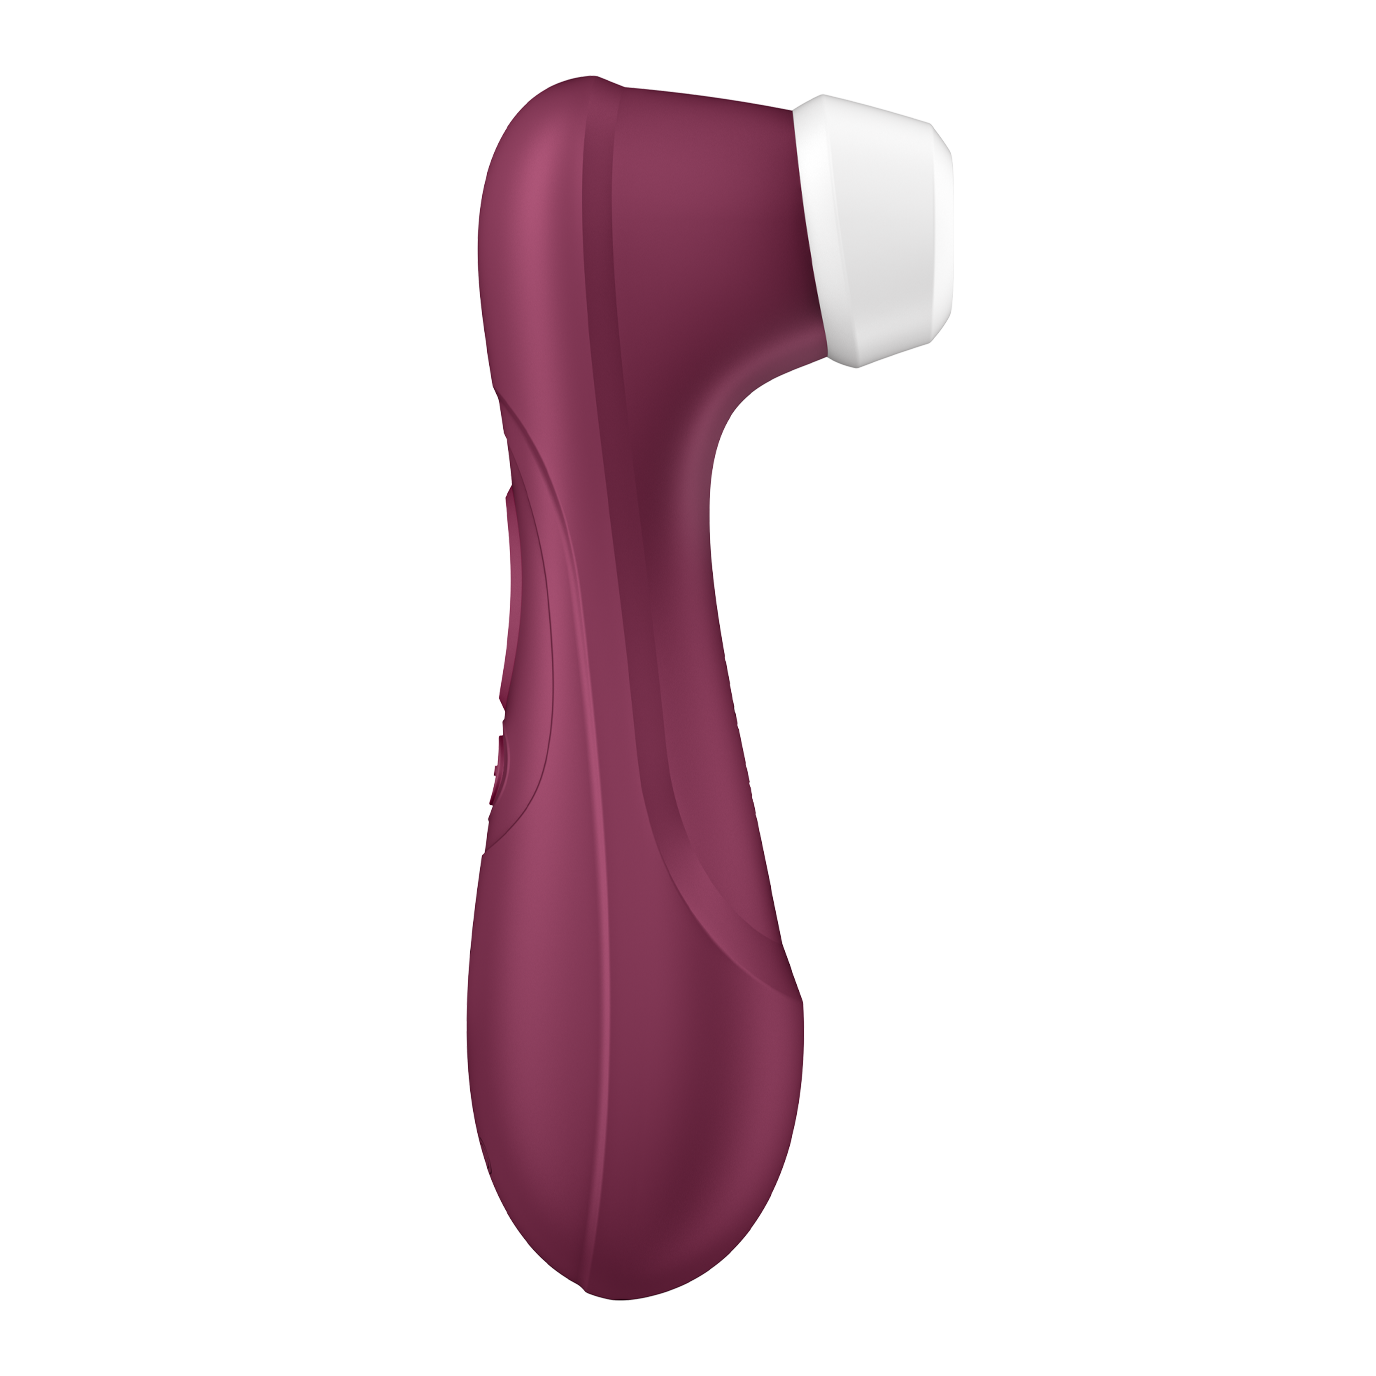 Side view of the Satisfyer Pro 2 - Generation 3. This angle showcases the full plastic body that has a removable, interchangeable silicone tip. The plastic body has a lot of divets and texture changes for easier handling. | Kinkly Shop